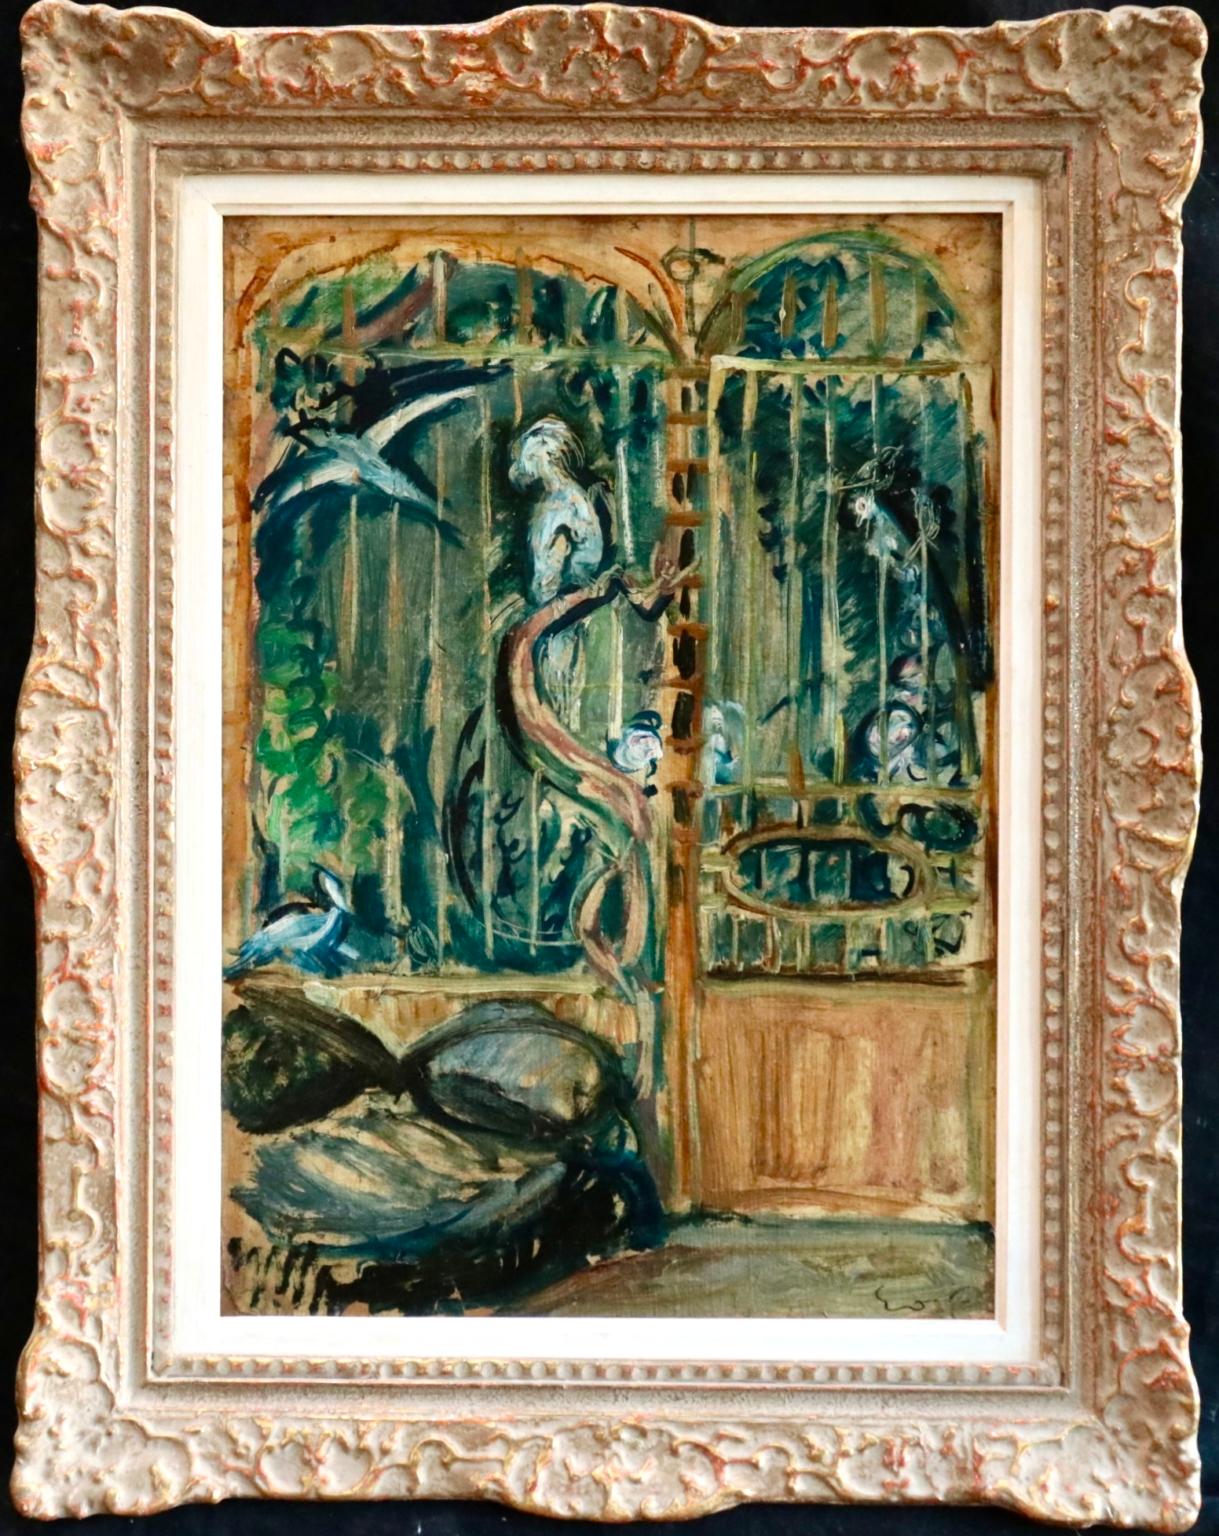 Achille-Émile Othon Friesz Interior Painting - The Aviary - 20th Century Post Impressionist Oil, Exotic Birds by Othon Friesz